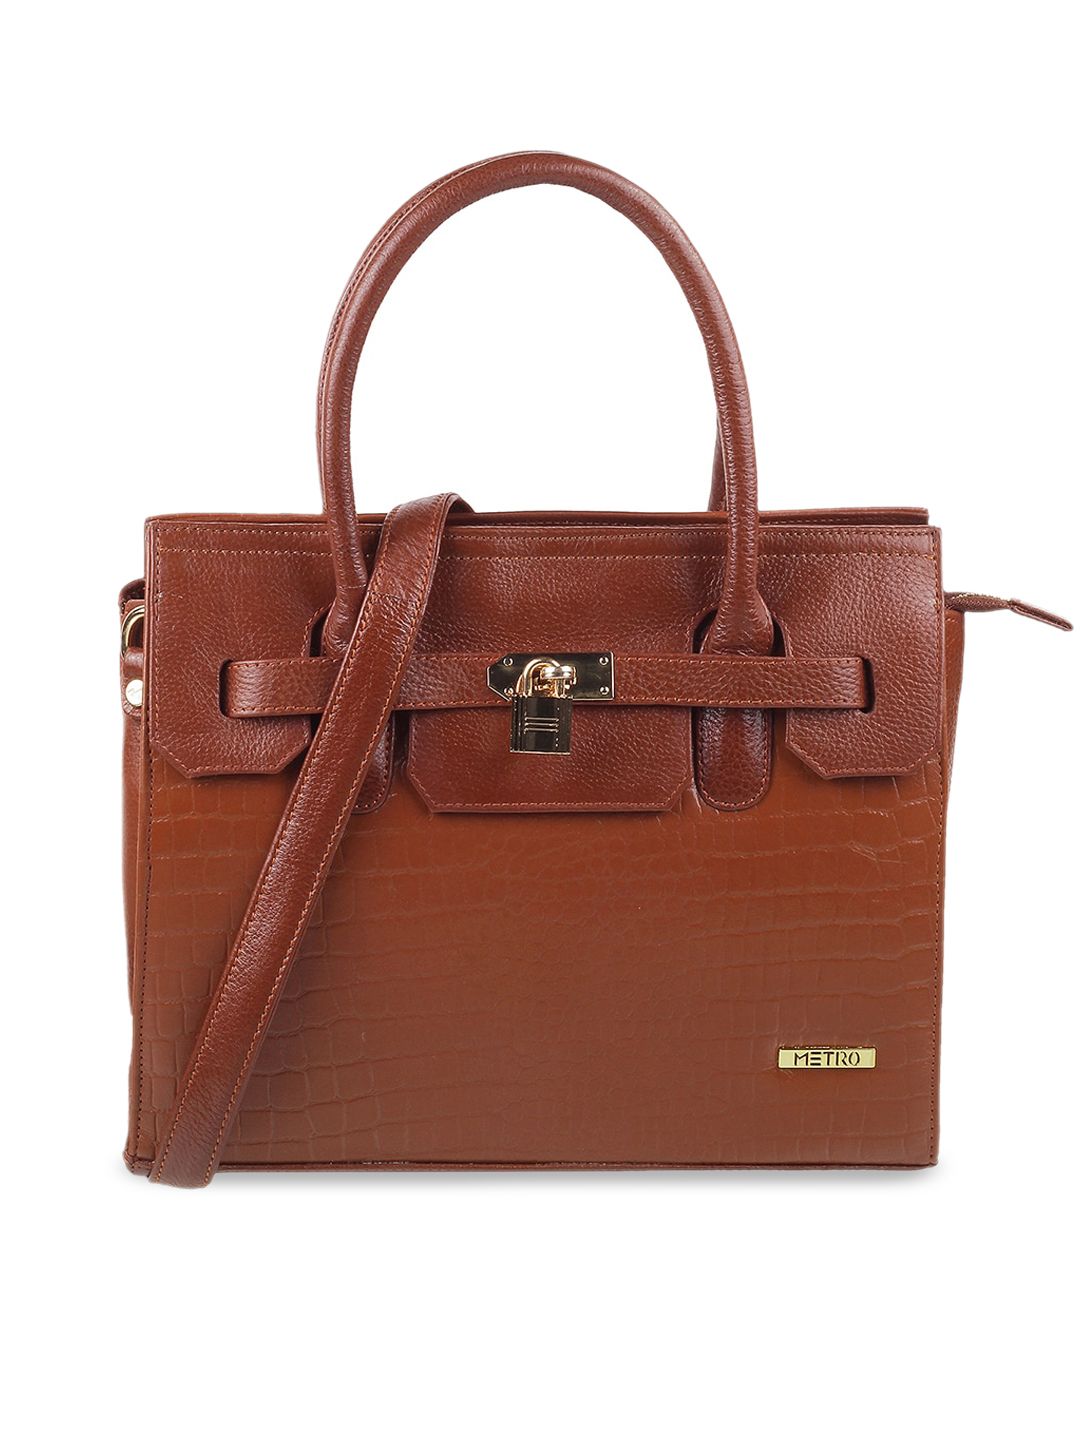 Metro Tan Leather Structured Handheld Bag with Bow Detail Price in India